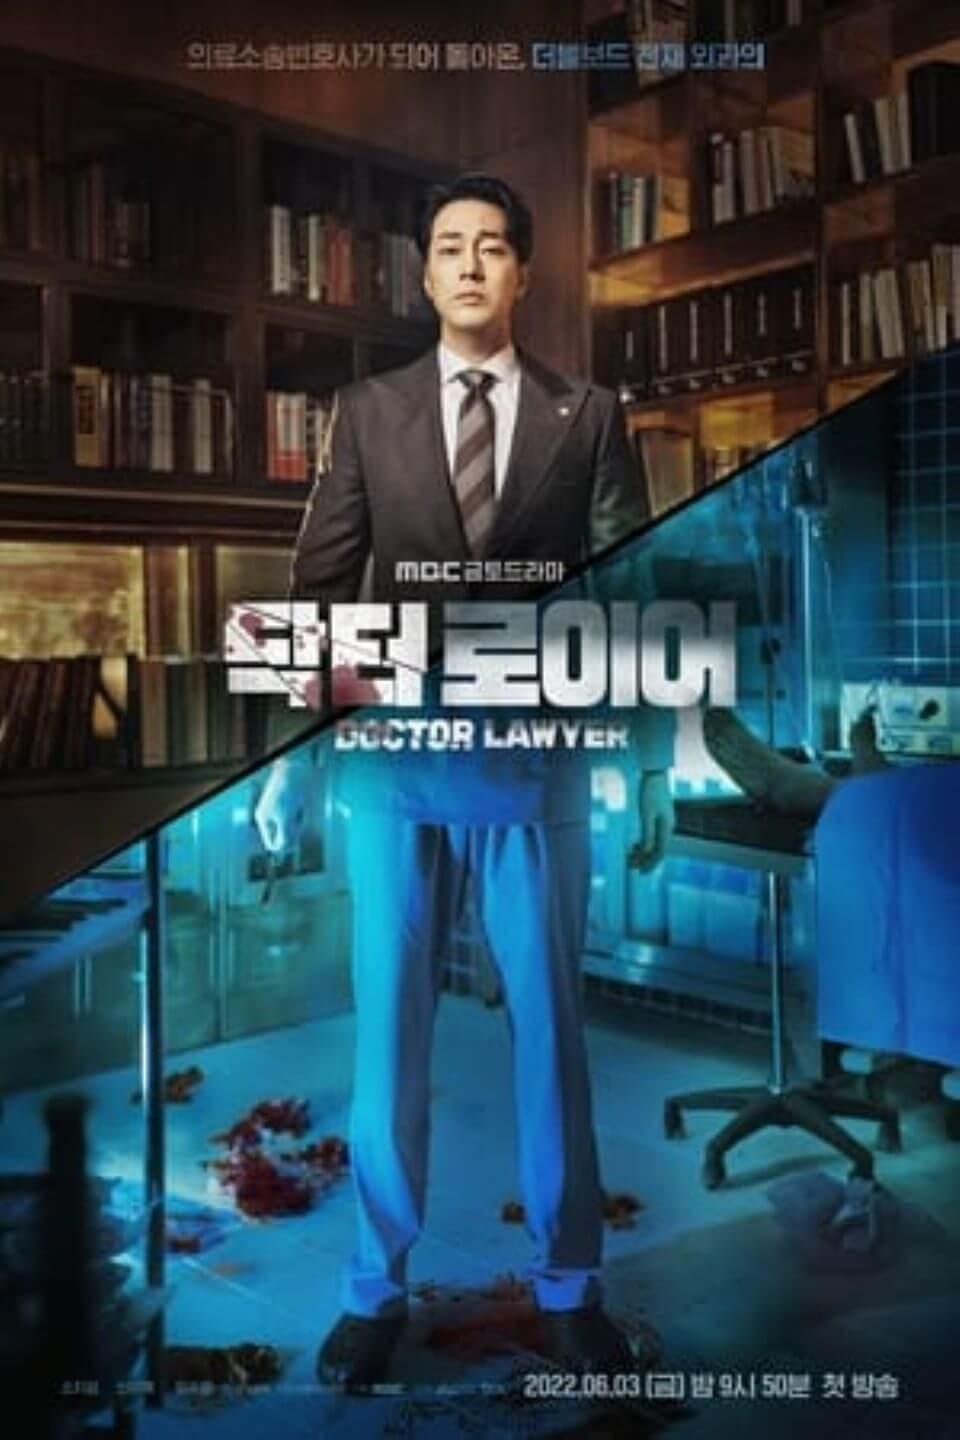 TV ratings for Doctor Lawyer (닥터 로이어) in Polonia. MBC TV series